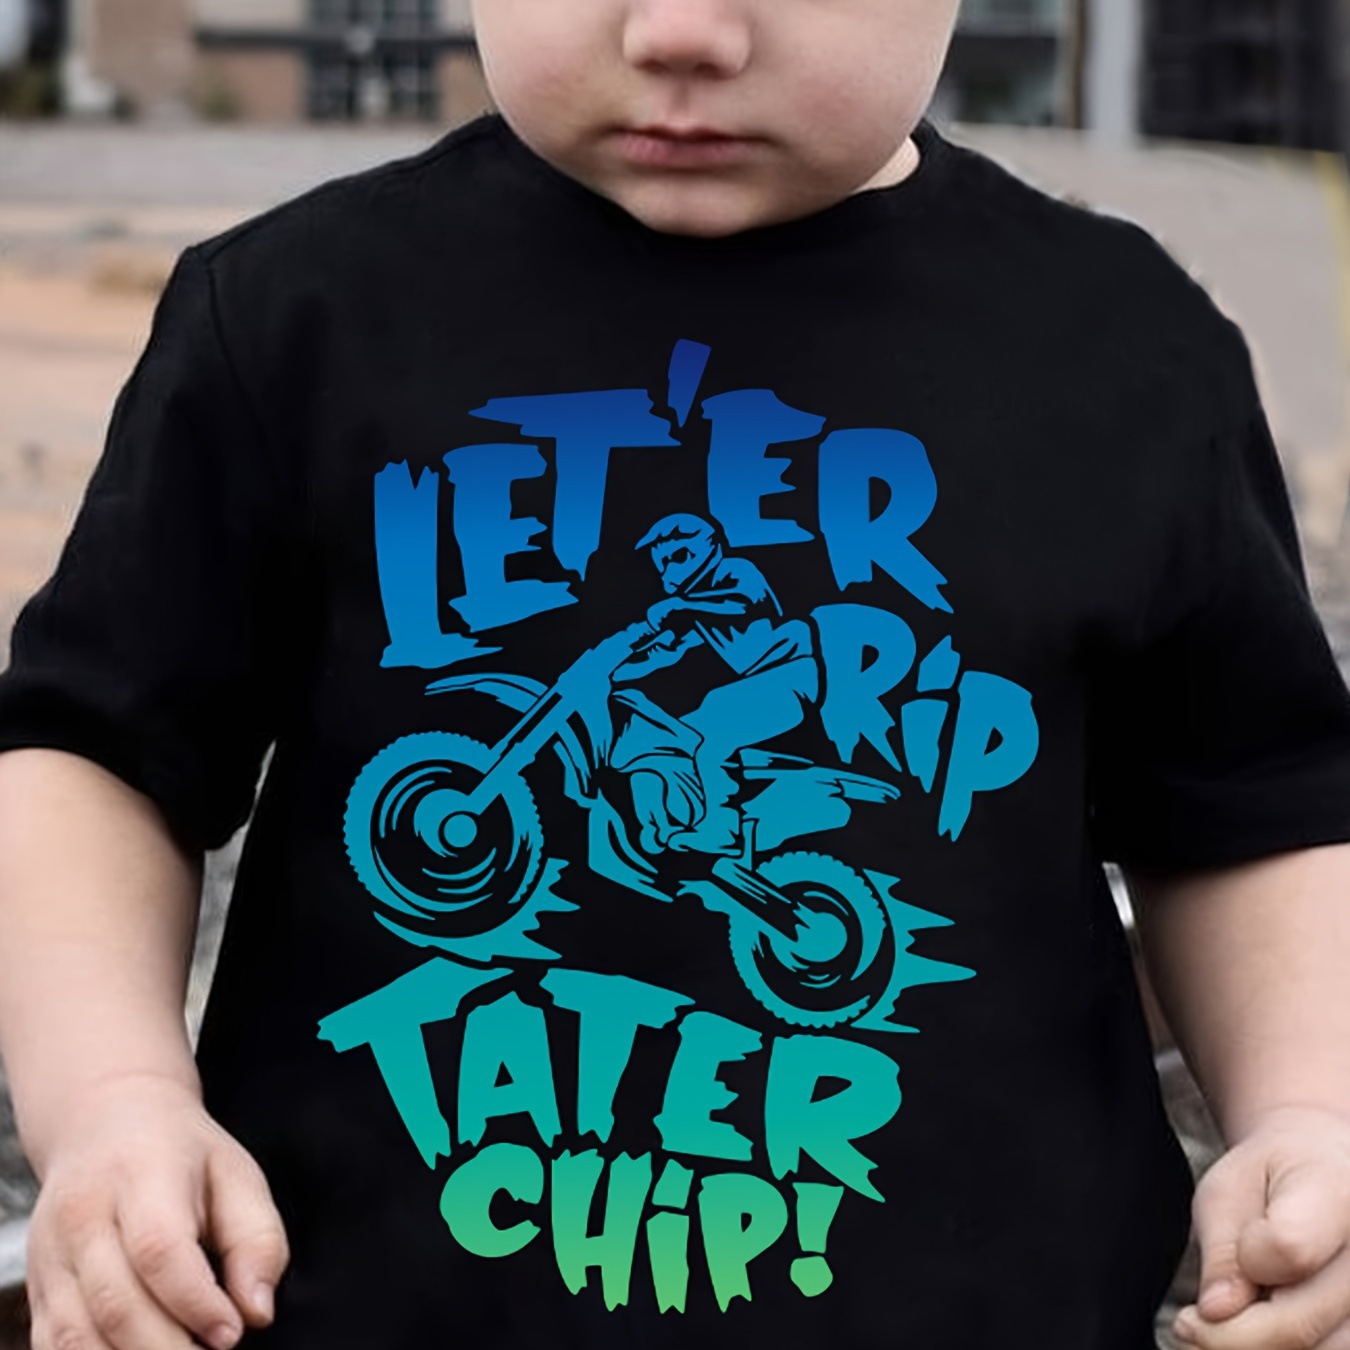 

Let Rip Tater Chip & Off-road Motorcycle Print T-shirt For Boys, Cute Tee Top, Casual Top For Spring And Summer